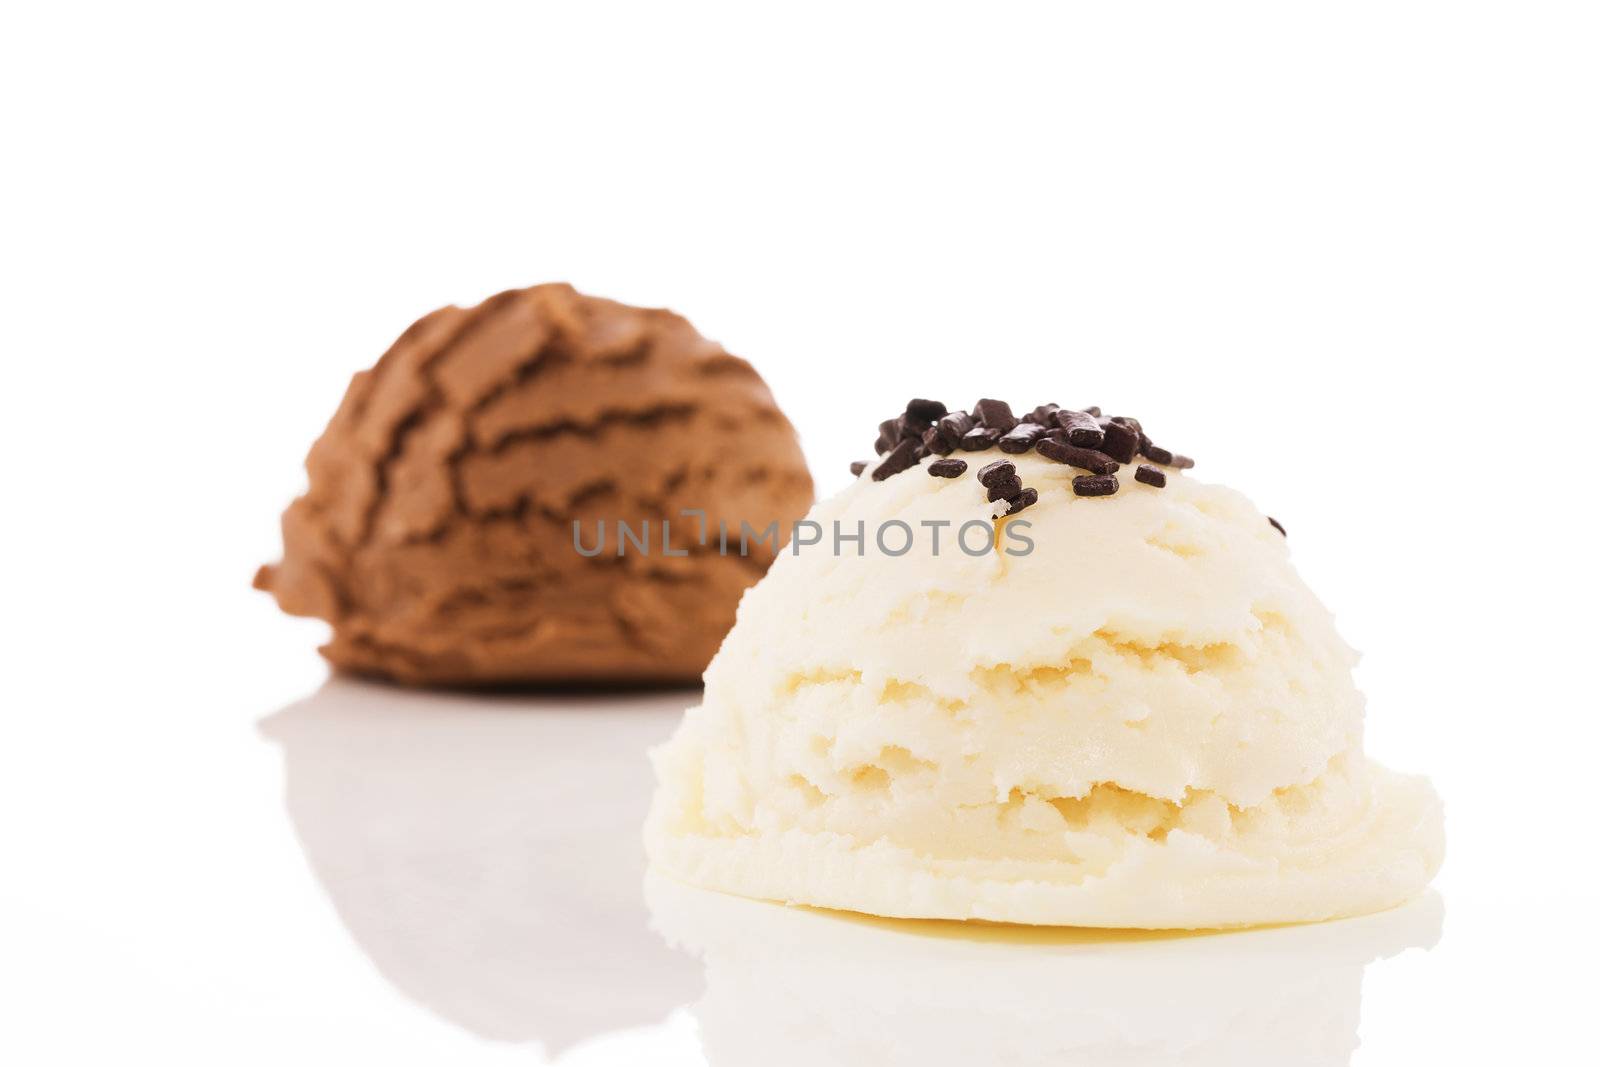 scoop of vanilla flavor ice cream with chocolate crumbles in front of a scoop chocolate ice cream on white background